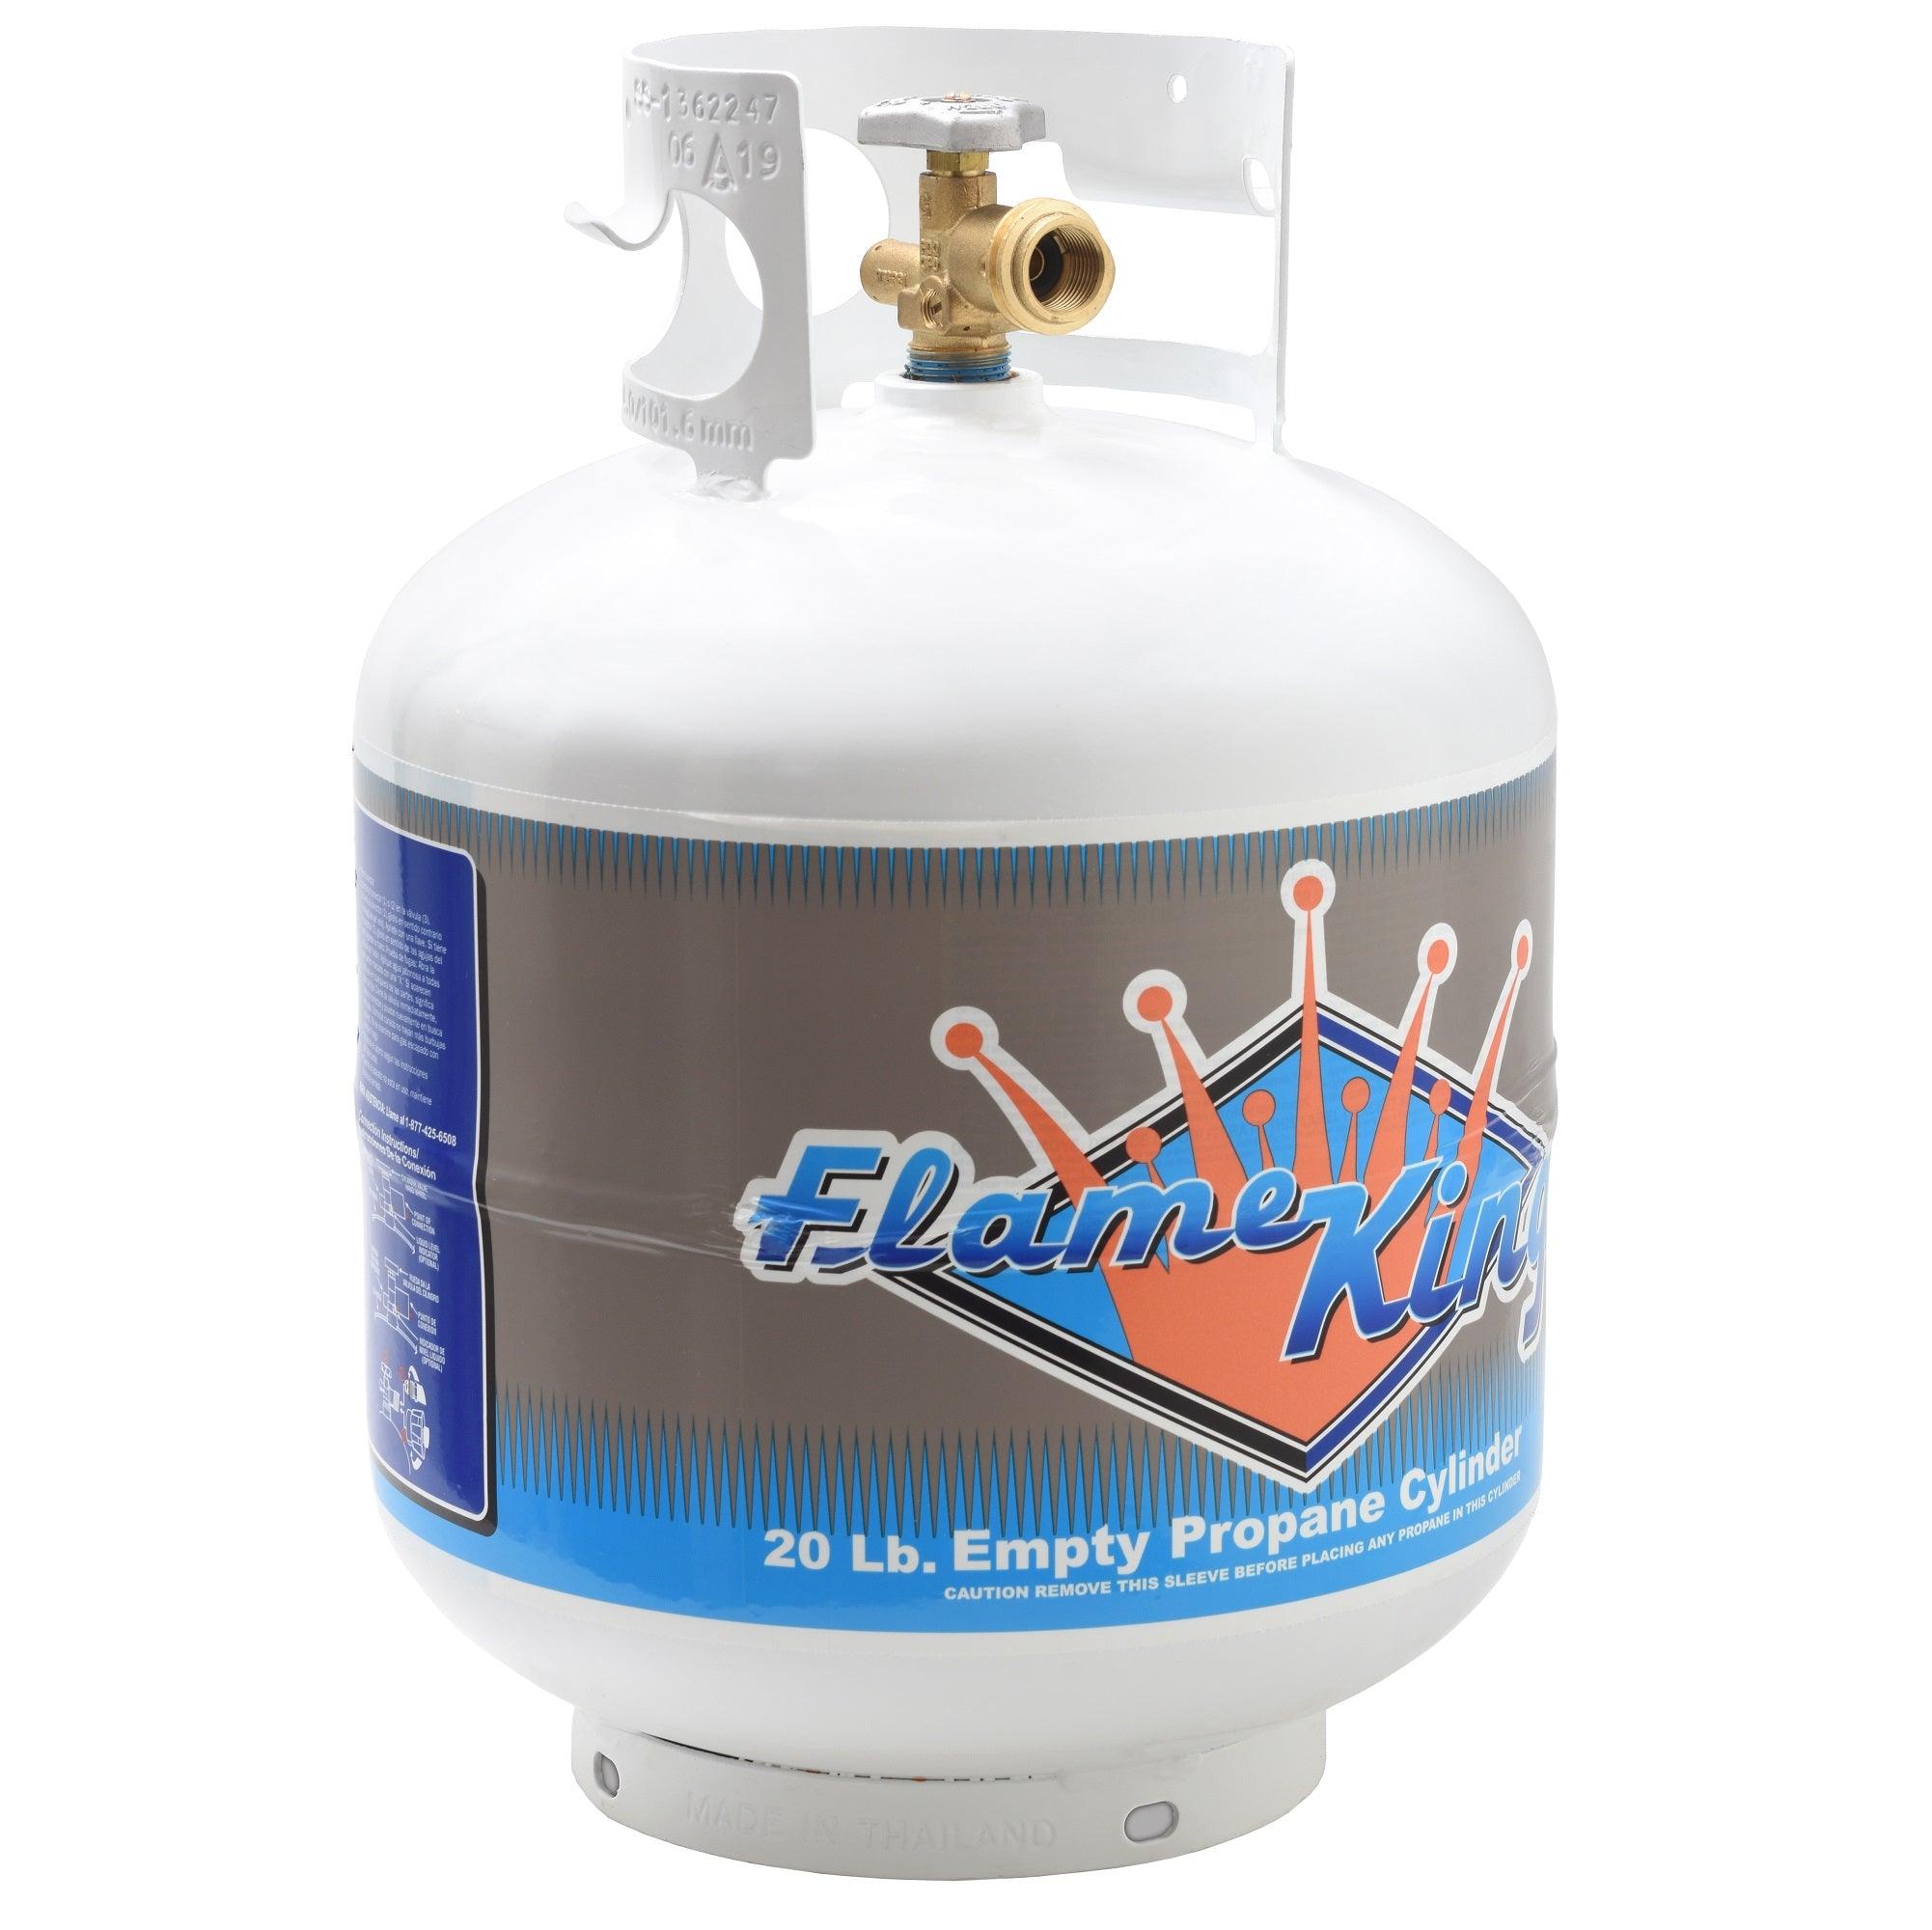 Flame King 20lb Propane Tank LP Cylinder with OPD - Flame King